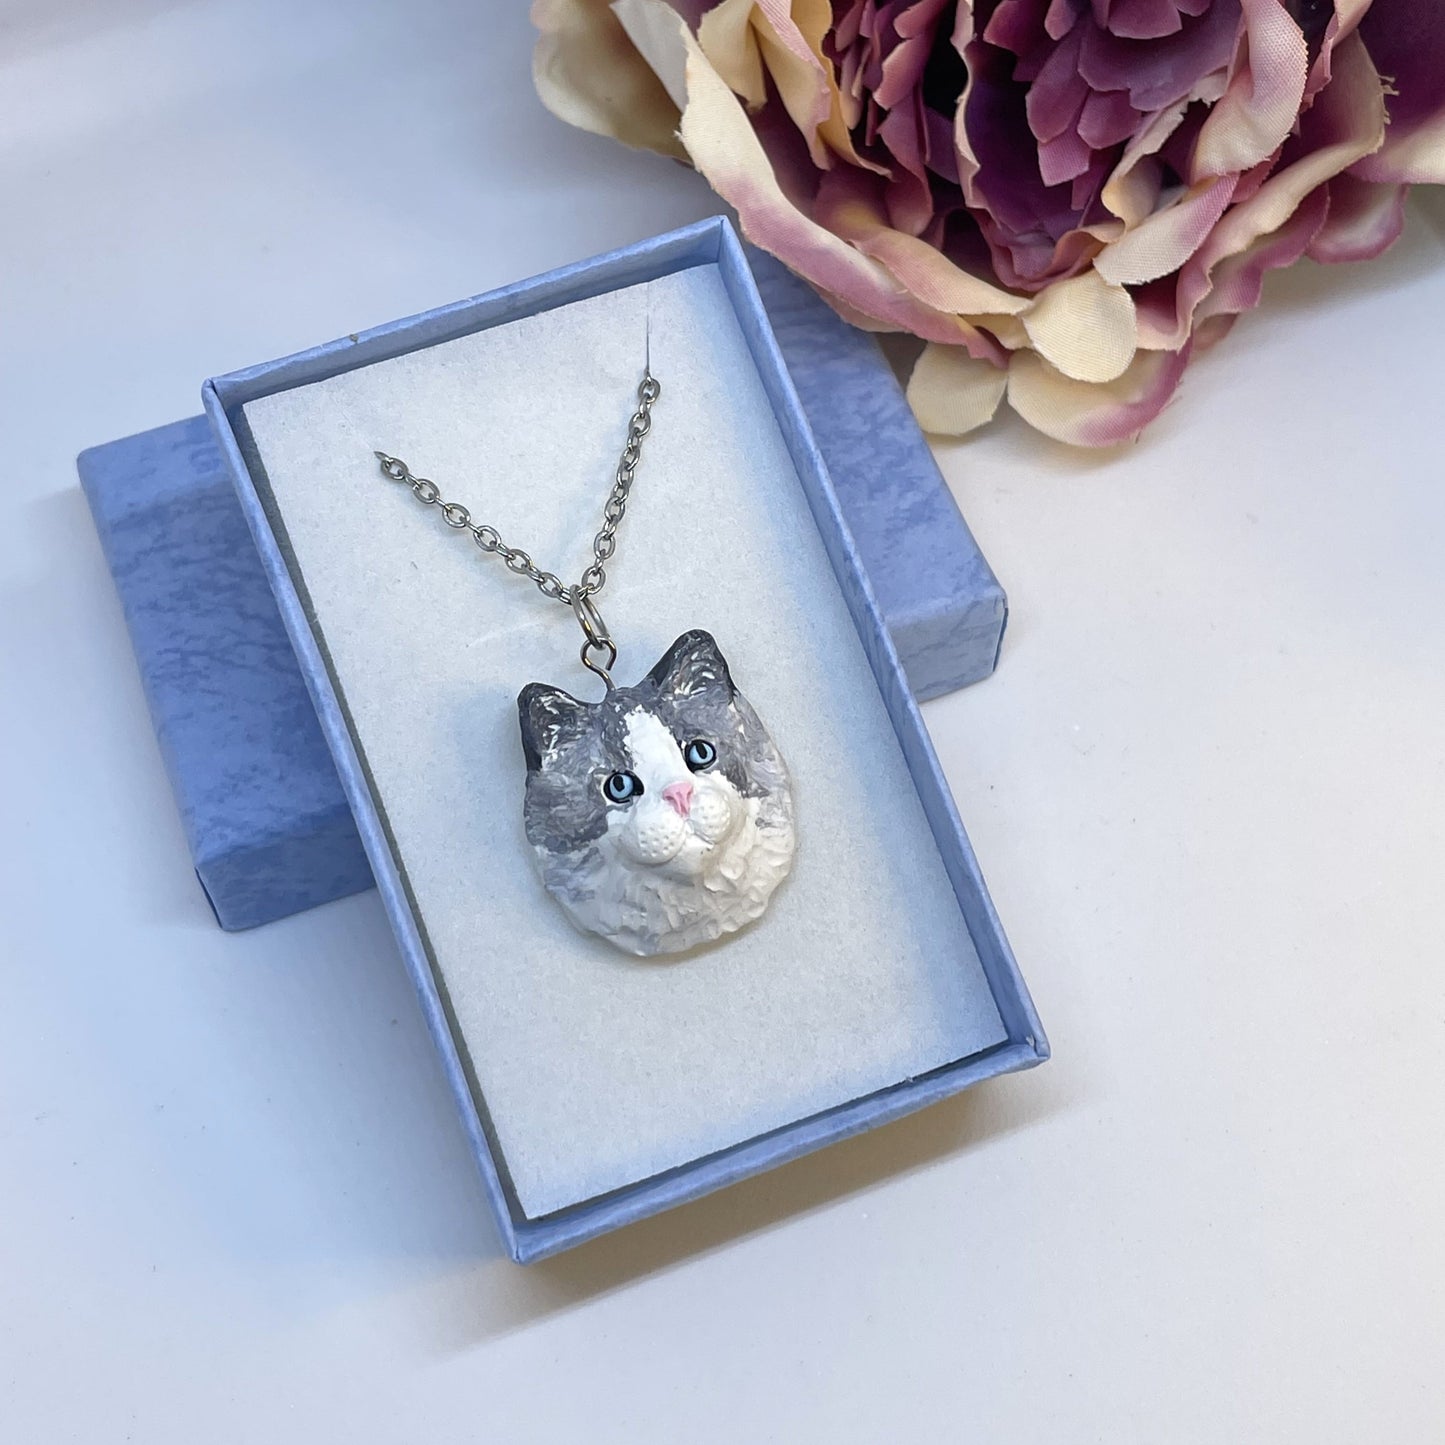 Handmade custom cat necklace pendant on chain, in blue display box in front of faux pink flower.